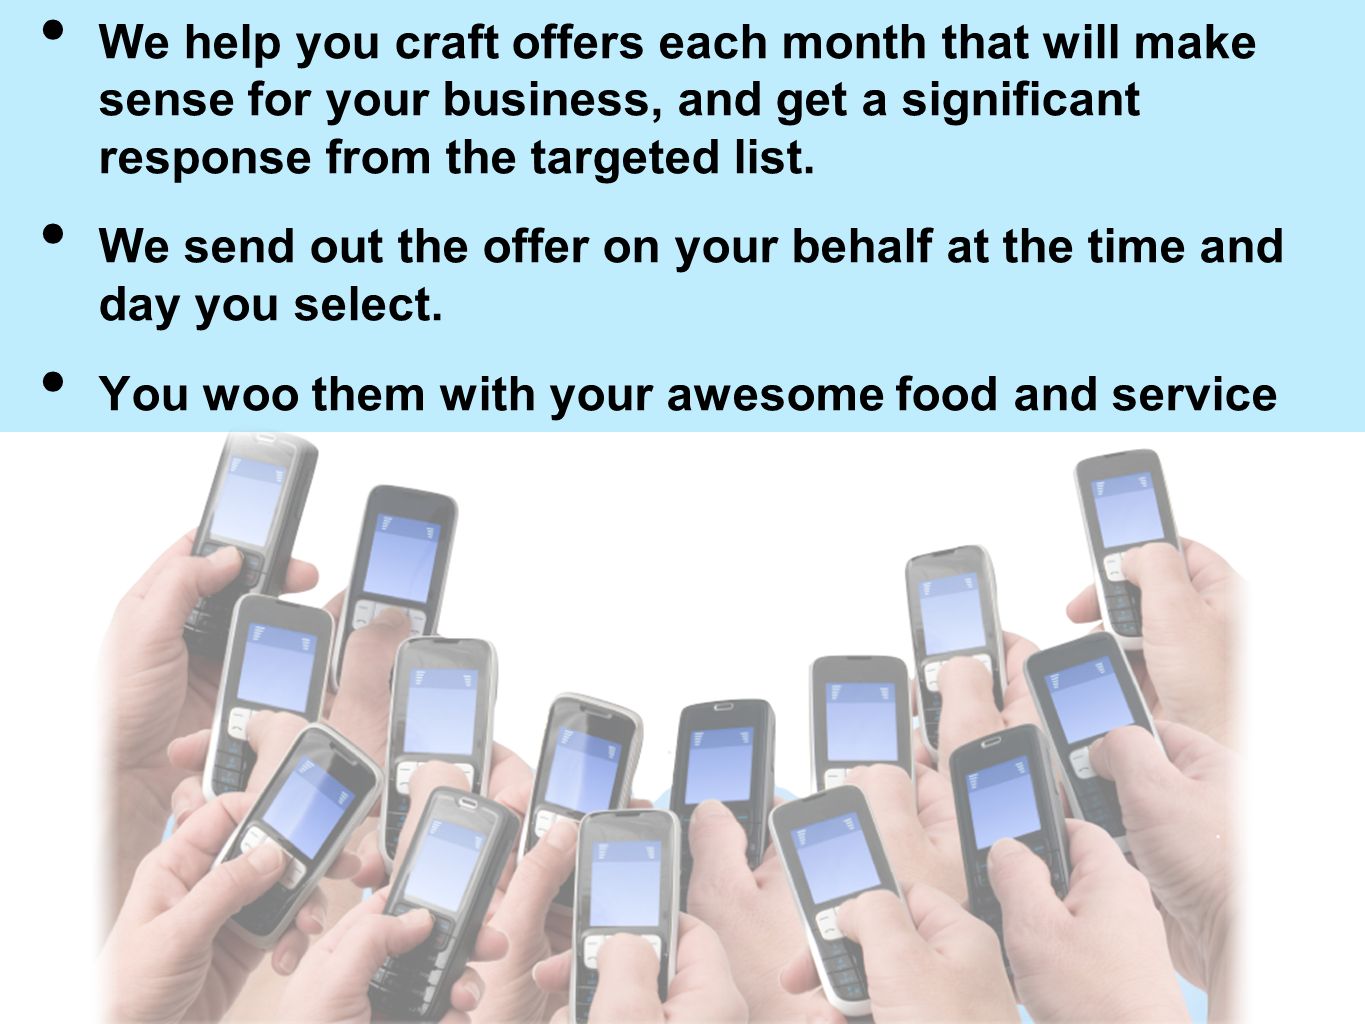 We help you craft offers each month that will make sense for your business, and get a significant response from the targeted list.